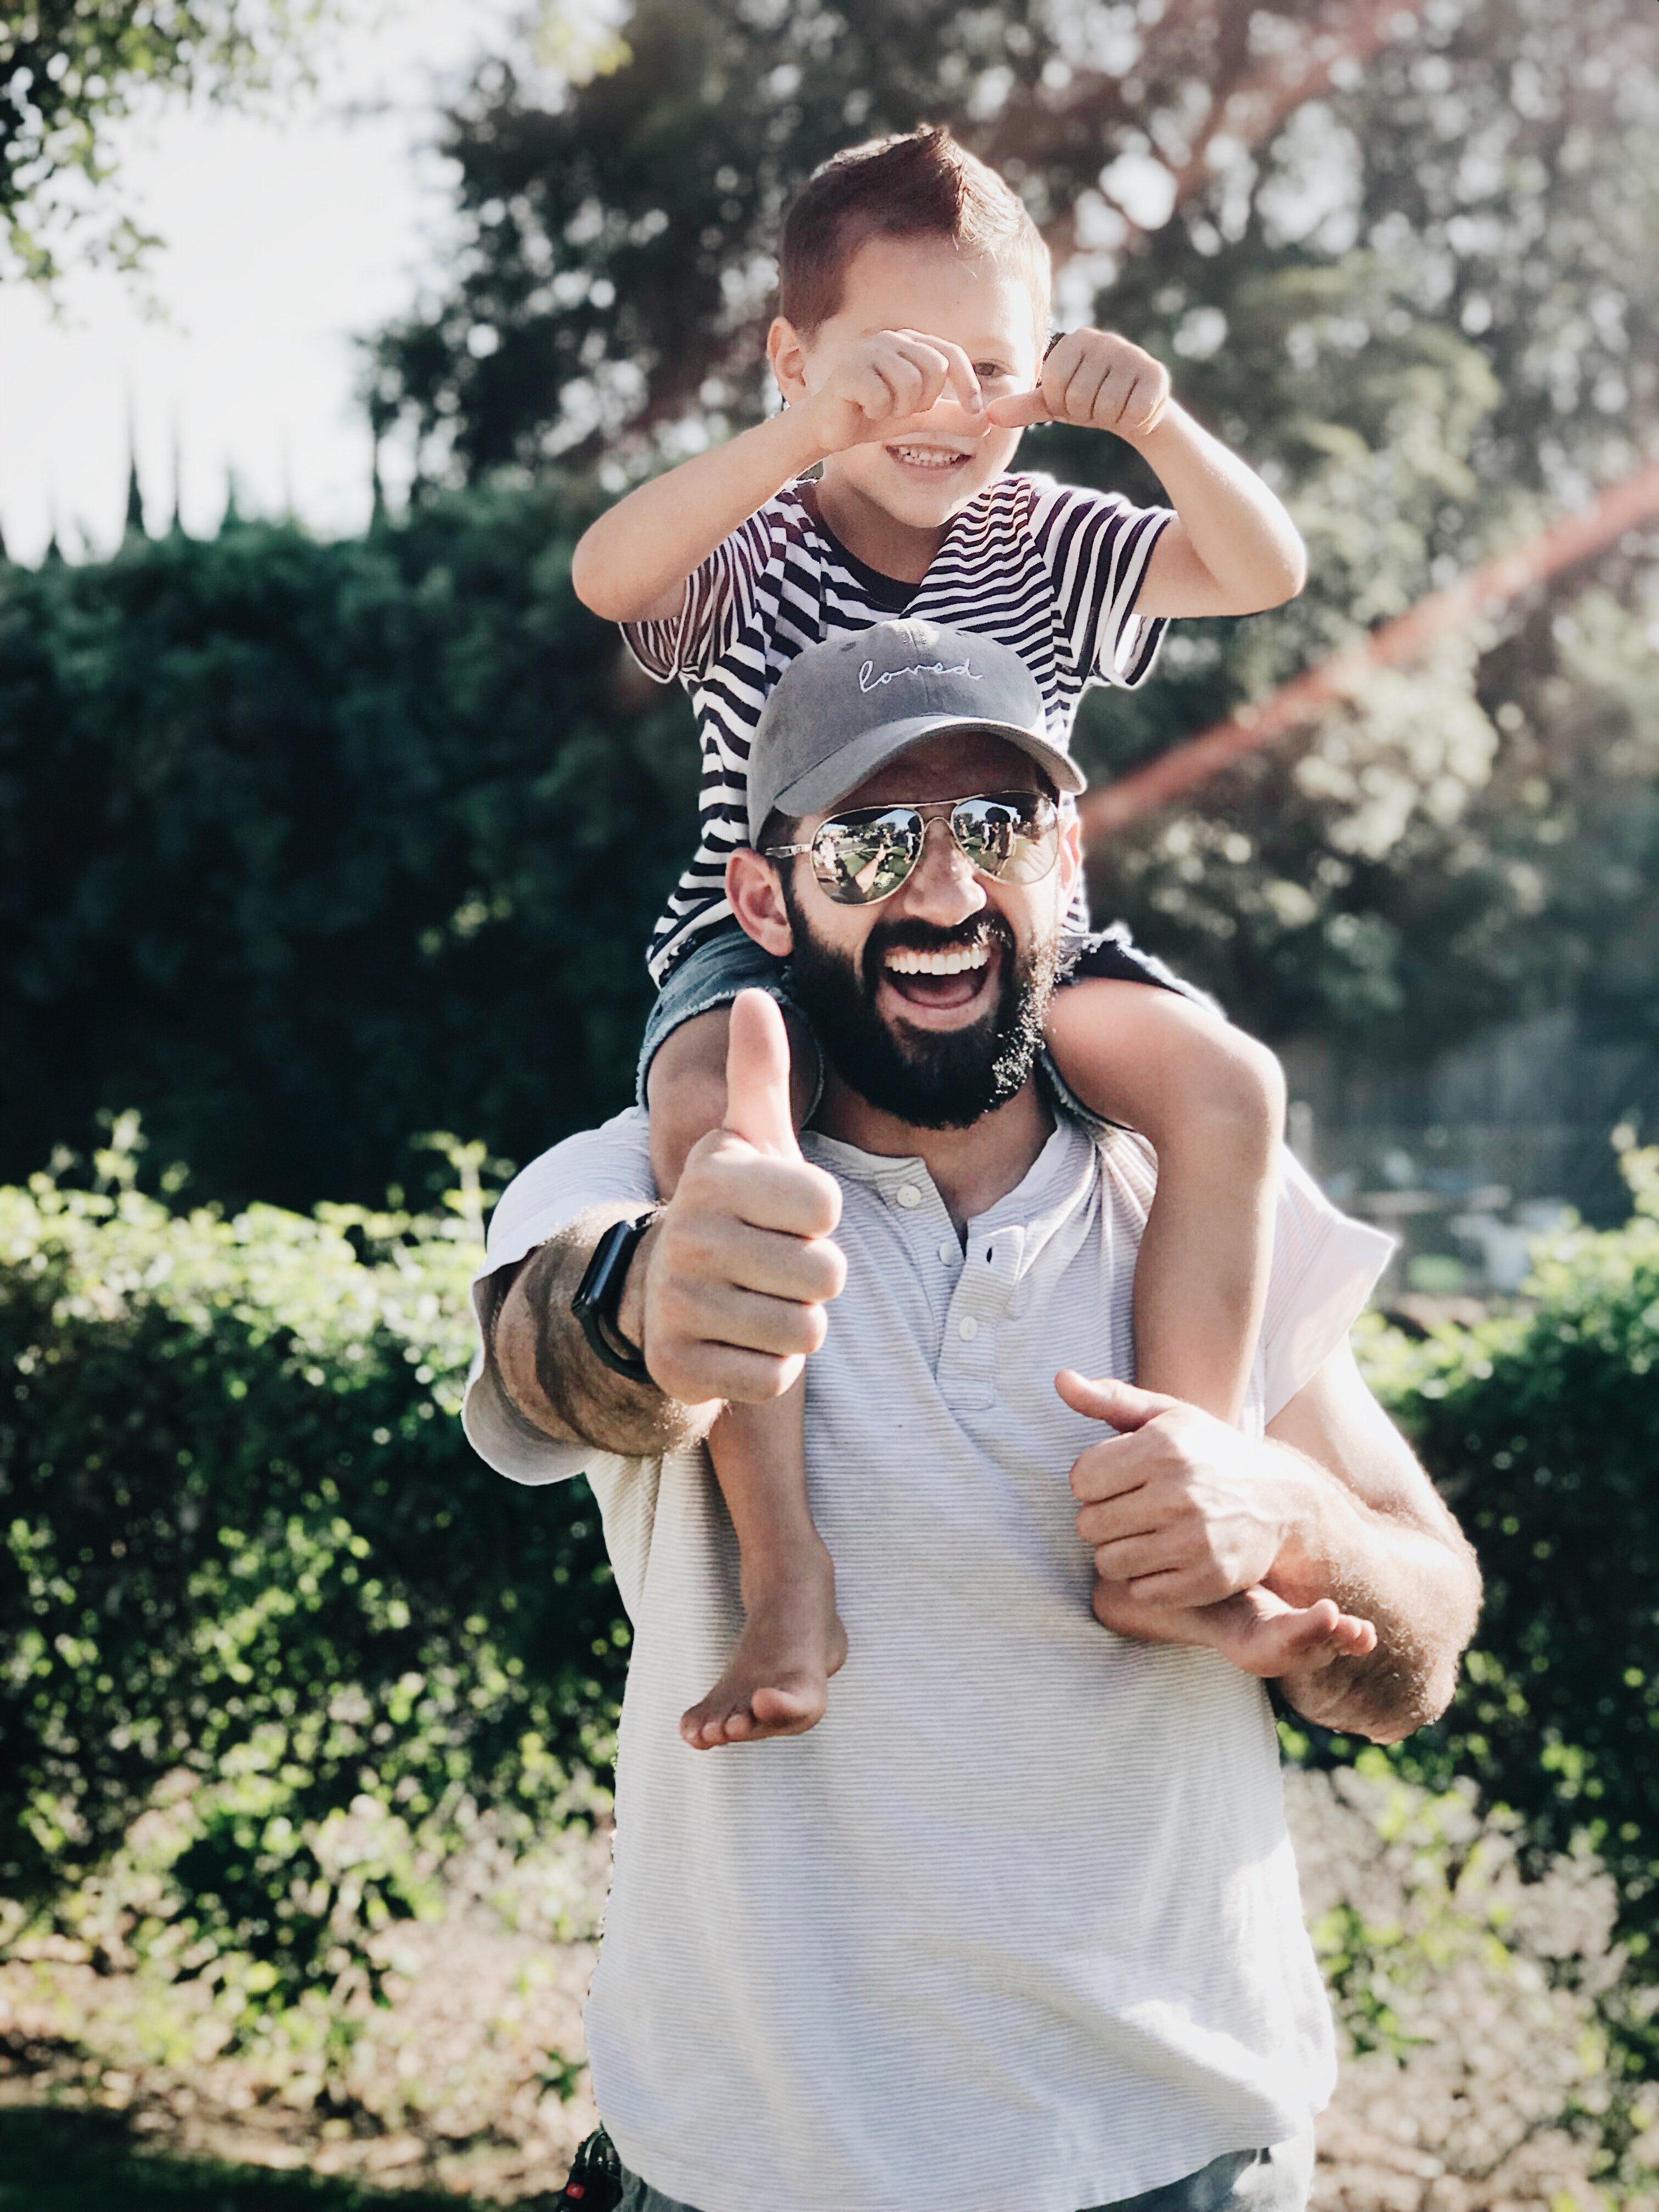 Colin did his best to ensure Ethan had a happy childhood. | Source: Pexels